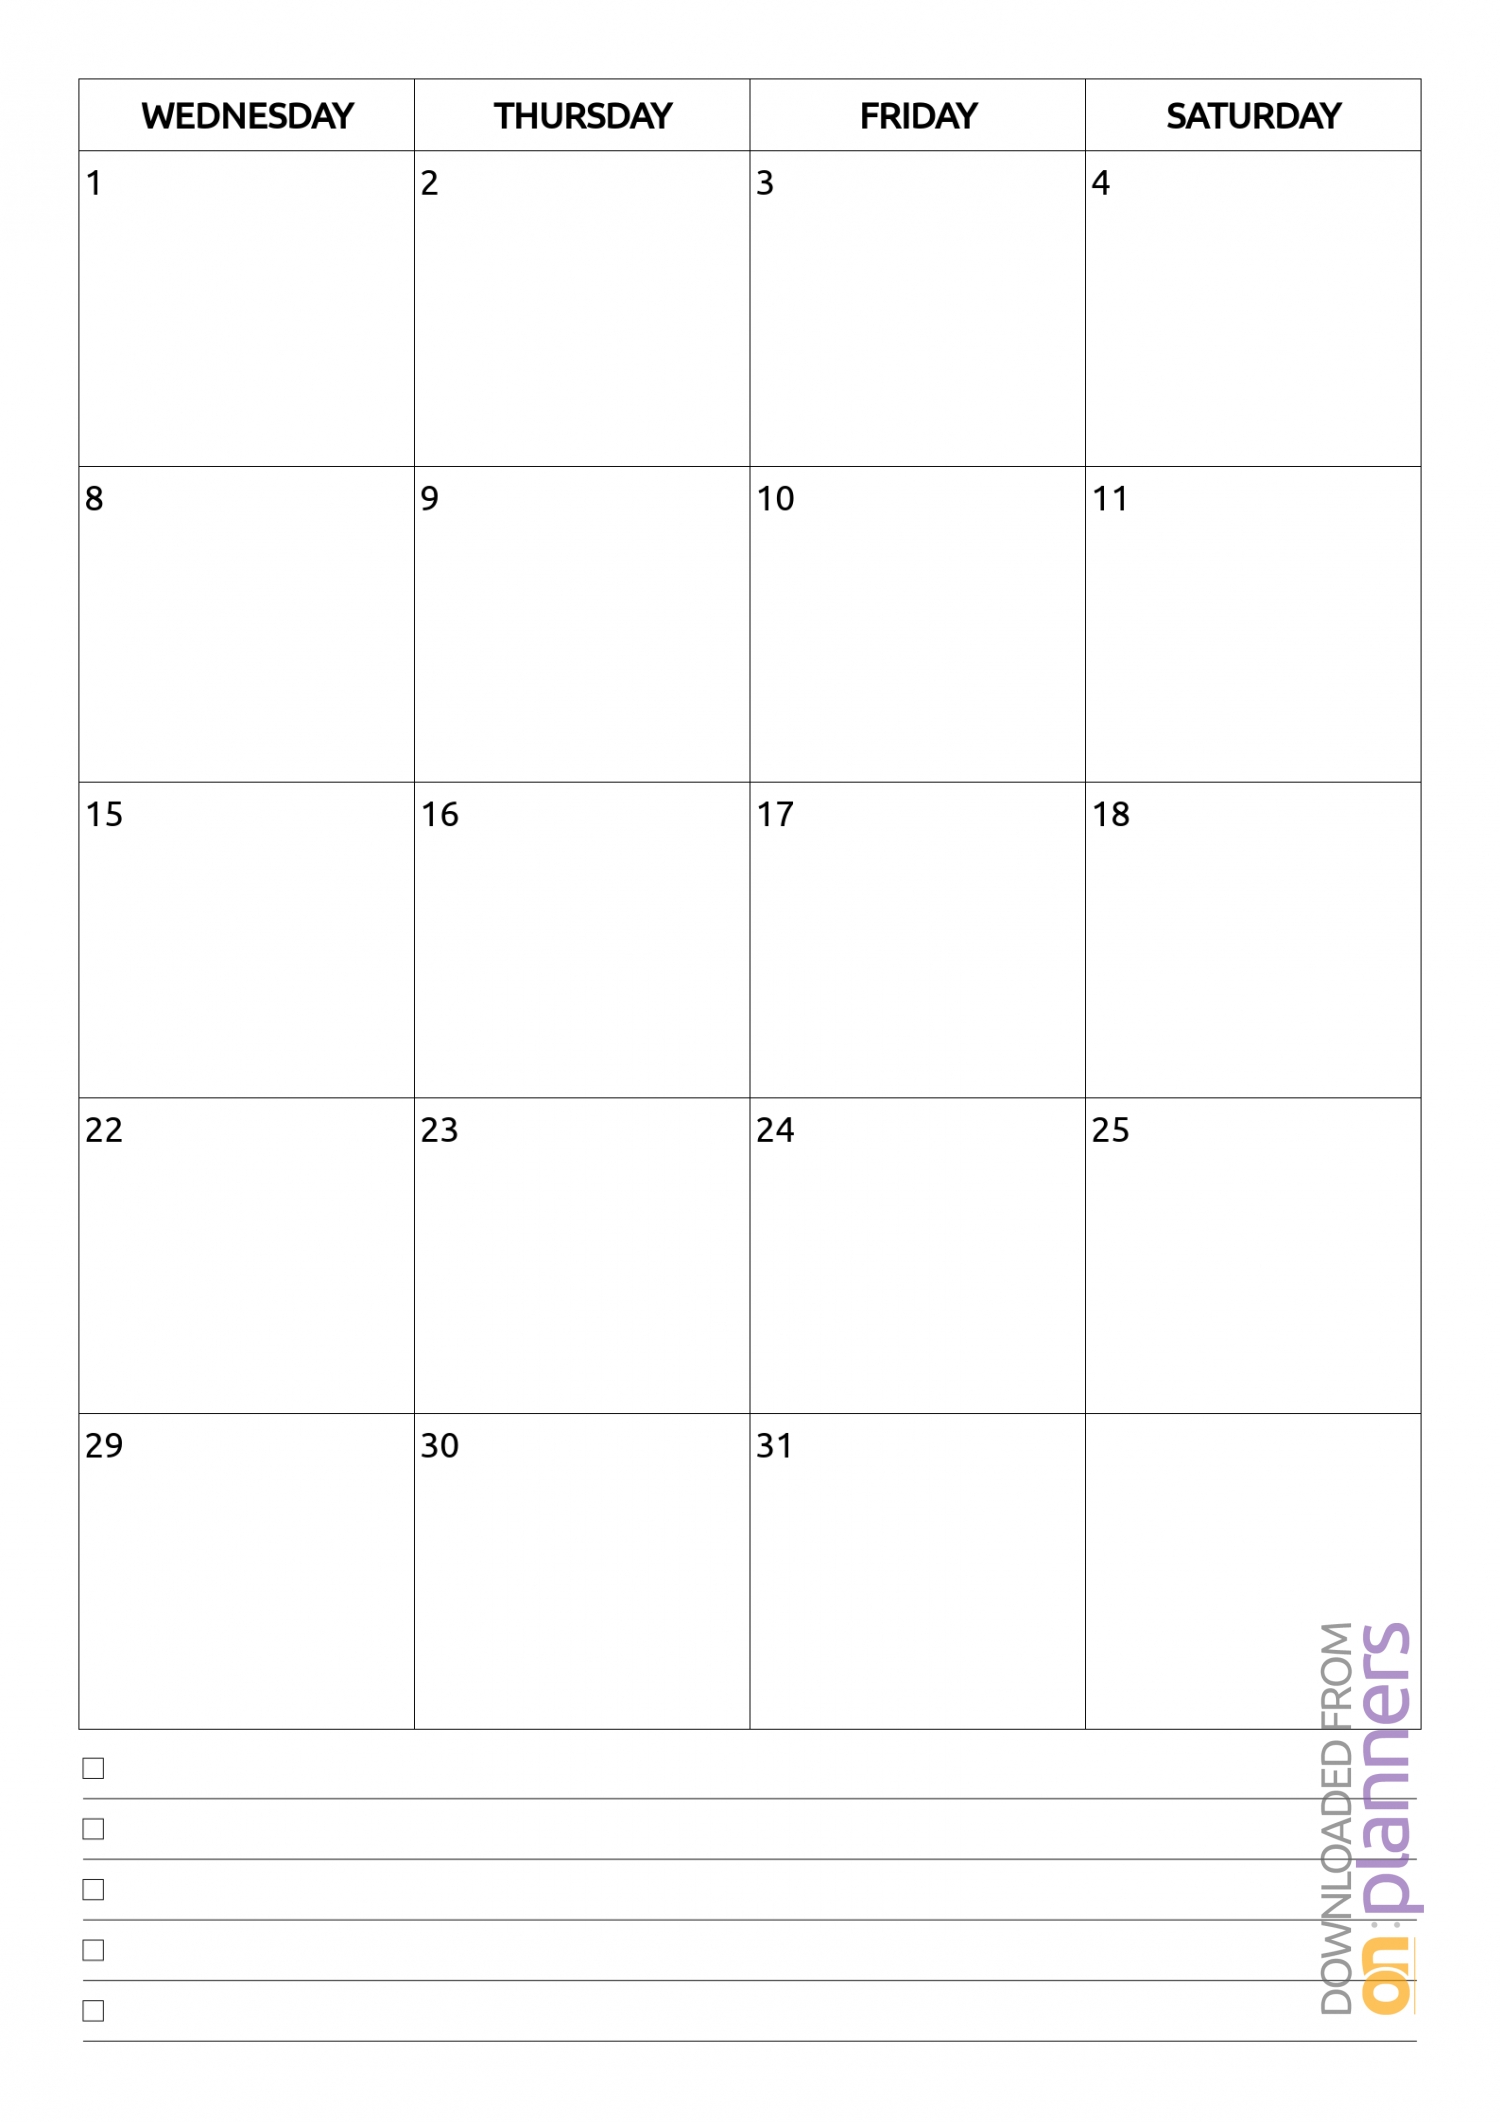 Download Printable Monthly Calendar With Notes Pdf intended for Free Printable Blank Monthly Calendar 2019